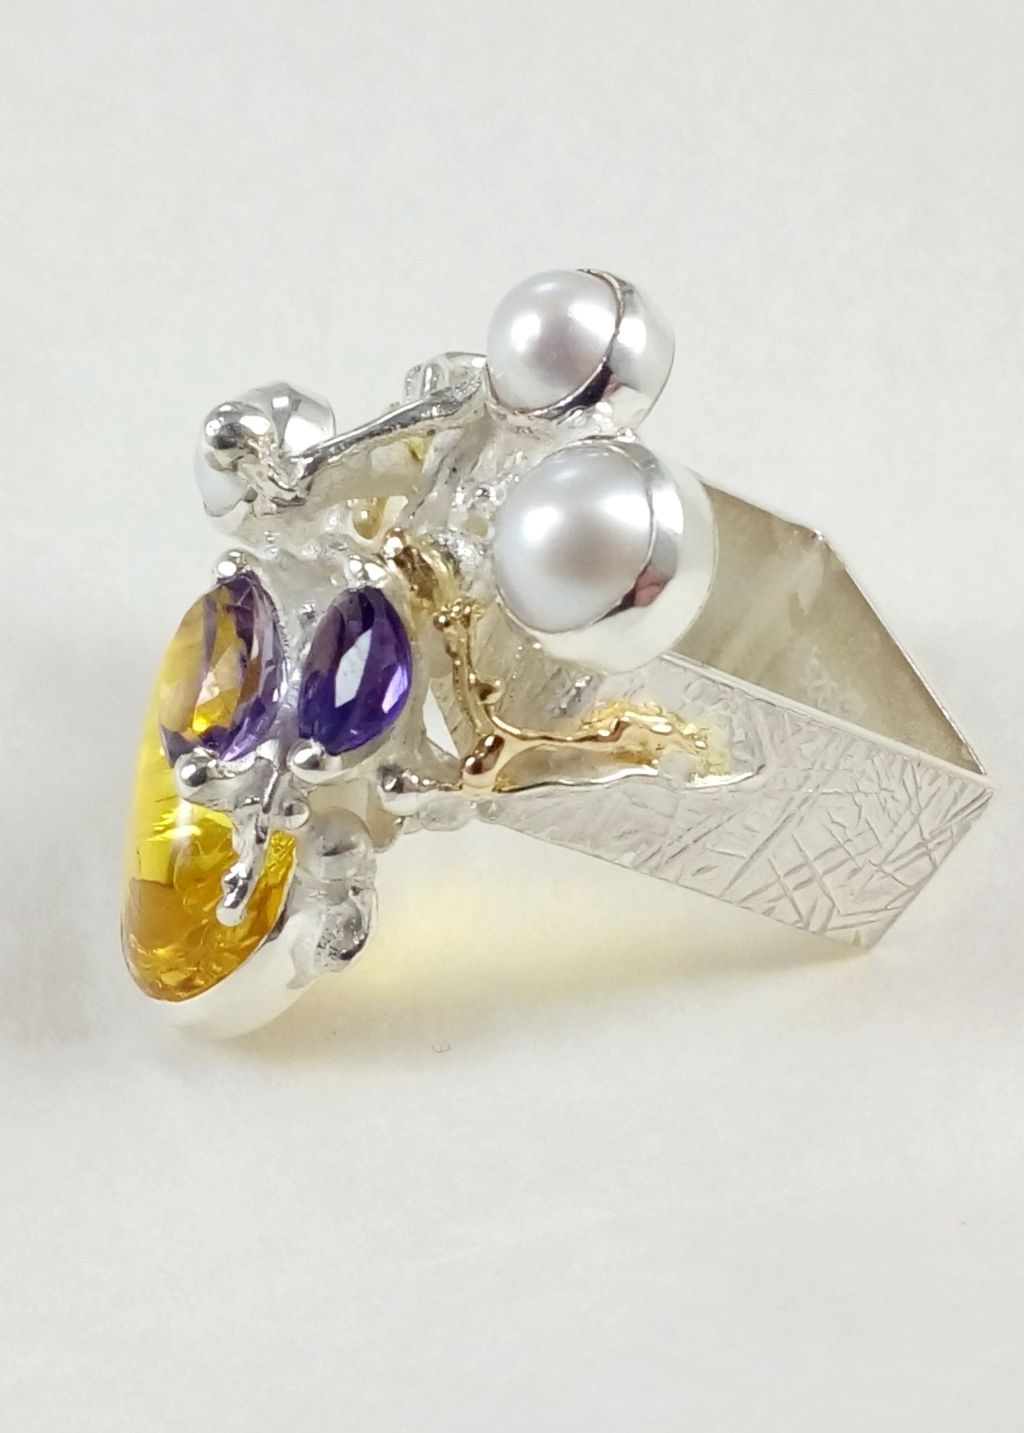 jewelry made from gold and silver, jewelry with color stones, jewelry with real pearls, gregory pyra piro square ring #5631, sculptural jewellery with ocean theme, antique motif inspired ring, sterling silver and 14k gold artisan jewellery, auction house with contemporary jewellery, color gemstone jewelry made by artistjewelry with detailed design, how to bid on auctions with collectibles and fine jewellery, shop for fine craft and collectibles, galleries with handcrafted jewellery for mature womens, antique style handcrafted jewellery, if you like antique jewellery you will like Gregory Pyra Piro art jewellery, handcrafted jewelry with semi precious stones and natural pearls, rings for women with two amethysts and pearl, jewellery with amber and amethysts, fine craft gallery handcrafted ring for sale, sterling silver and 14 karat gold ring